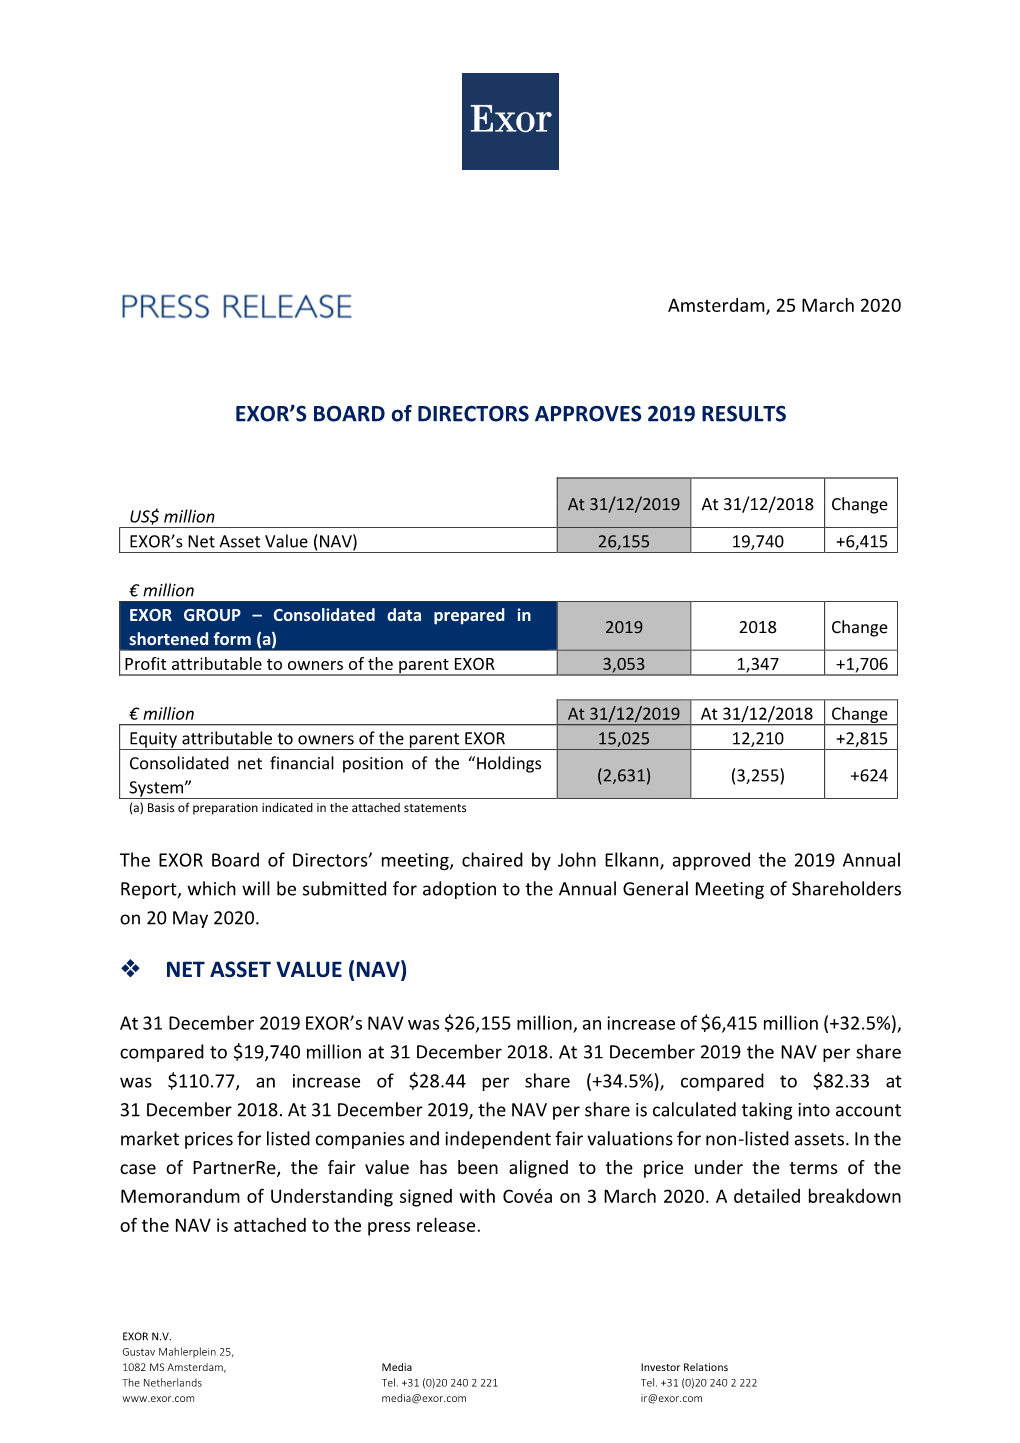 EXOR's BOARD of DIRECTORS APPROVES 2019 RESULTS NET